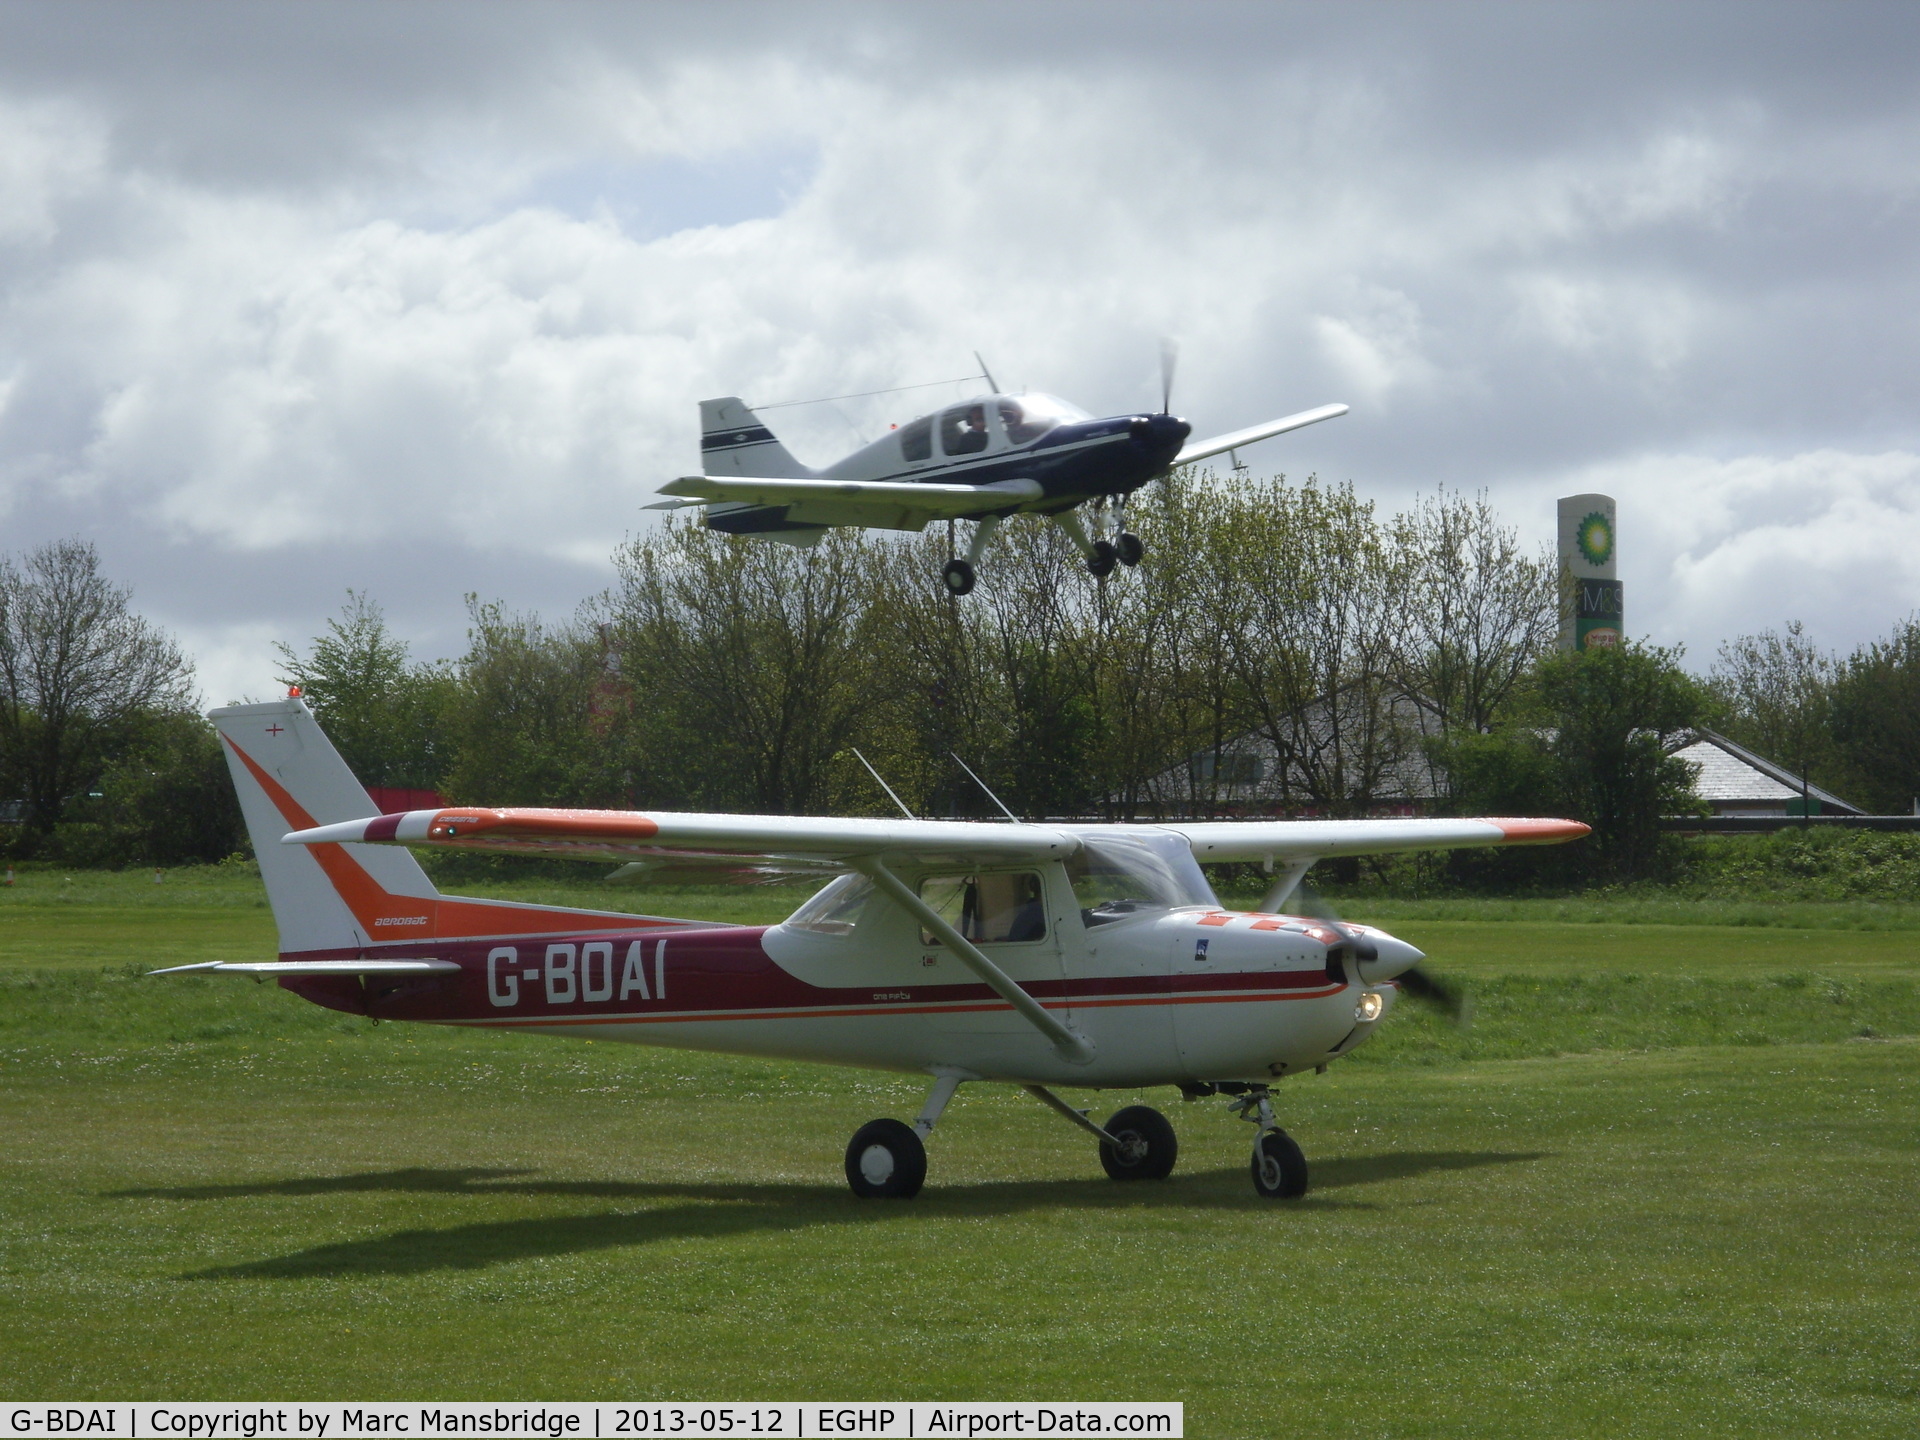 G-BDAI, 1975 Reims F150M C/N 0266, Taxiing out at Popham airfield with G-AZEV landing behind